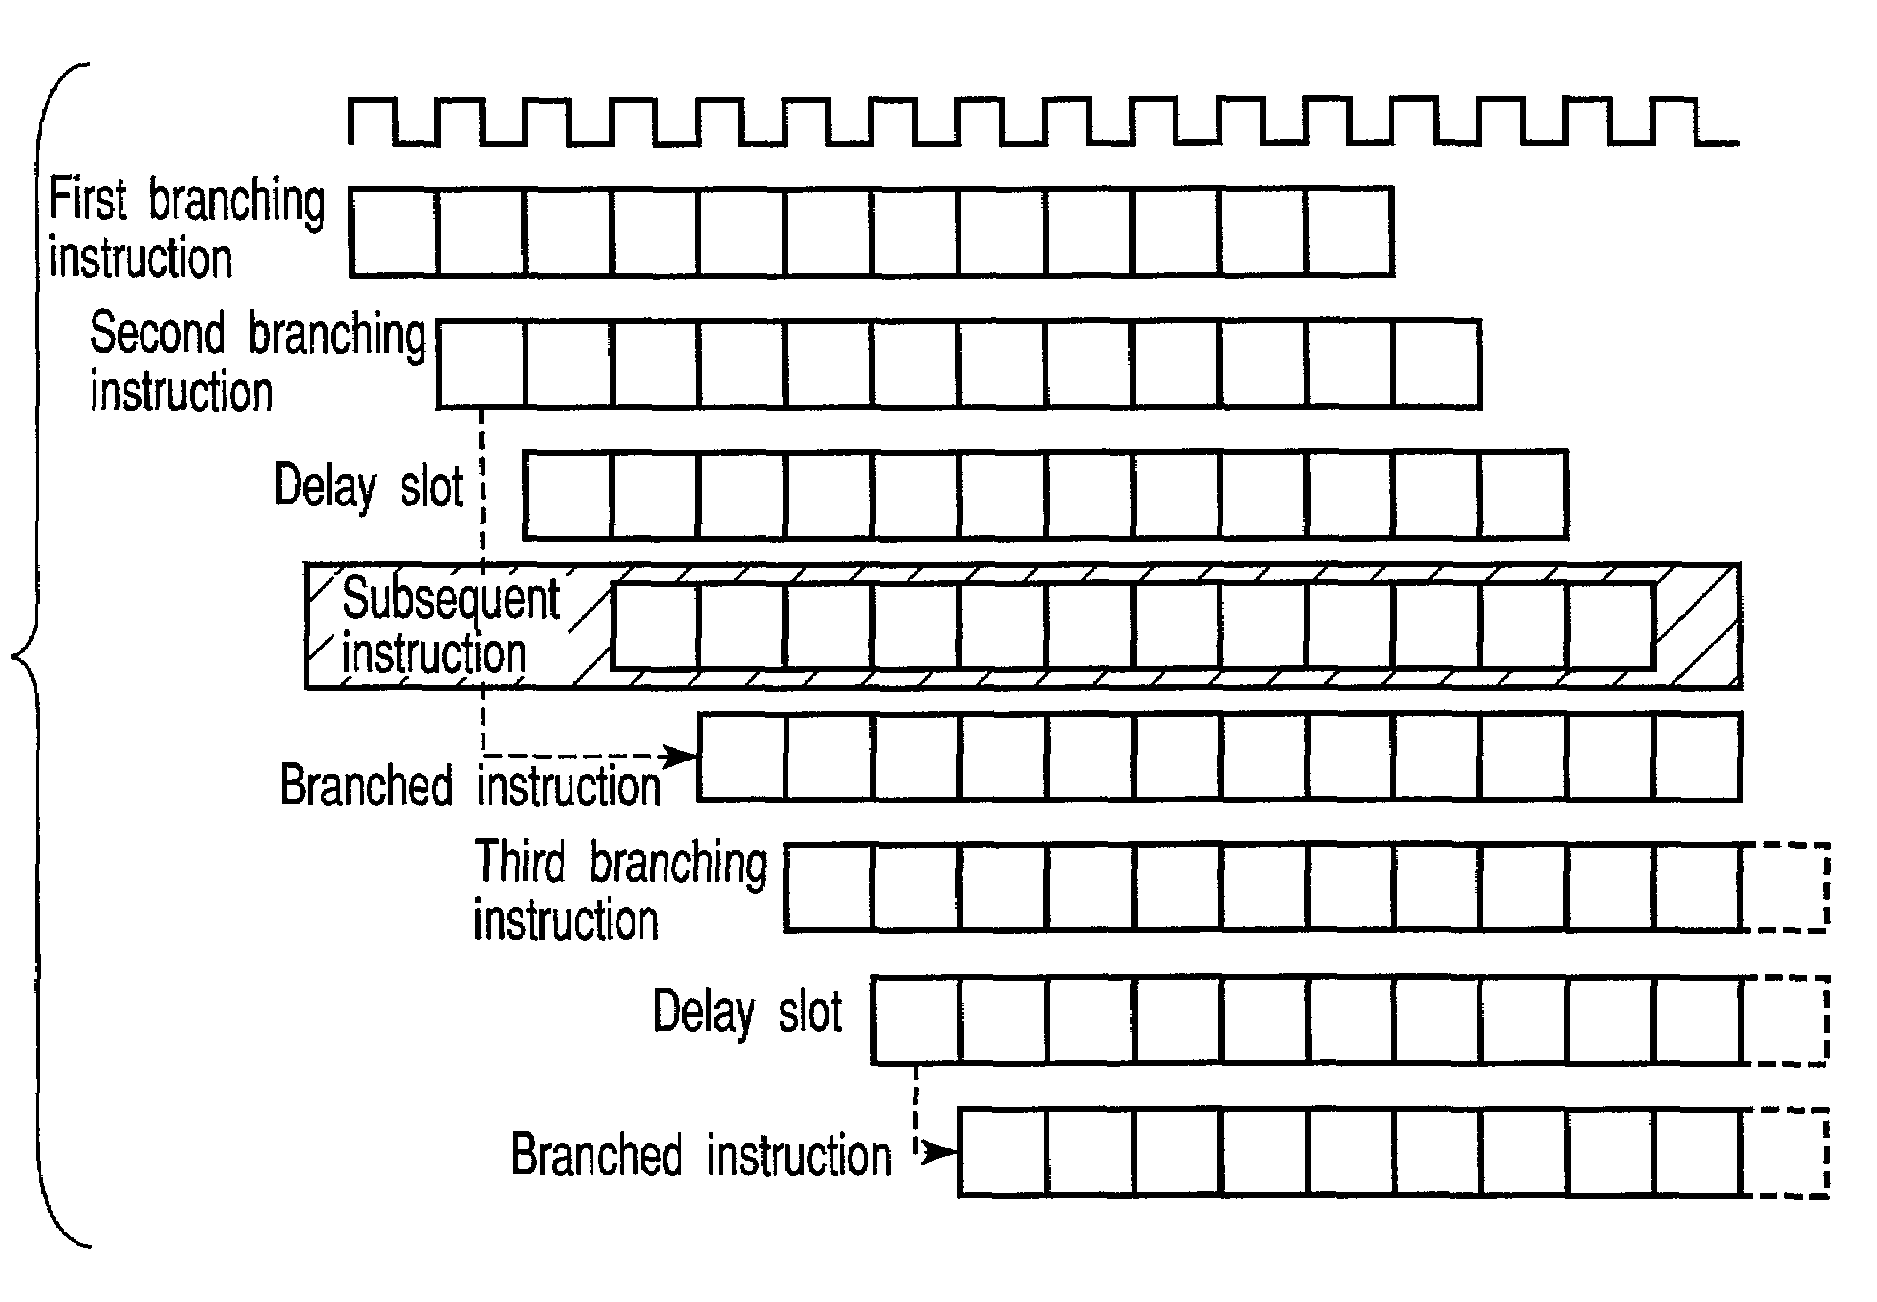 Multi-table branch prediction circuit for predicting a branch's target address based on the branch's delay slot instruction address